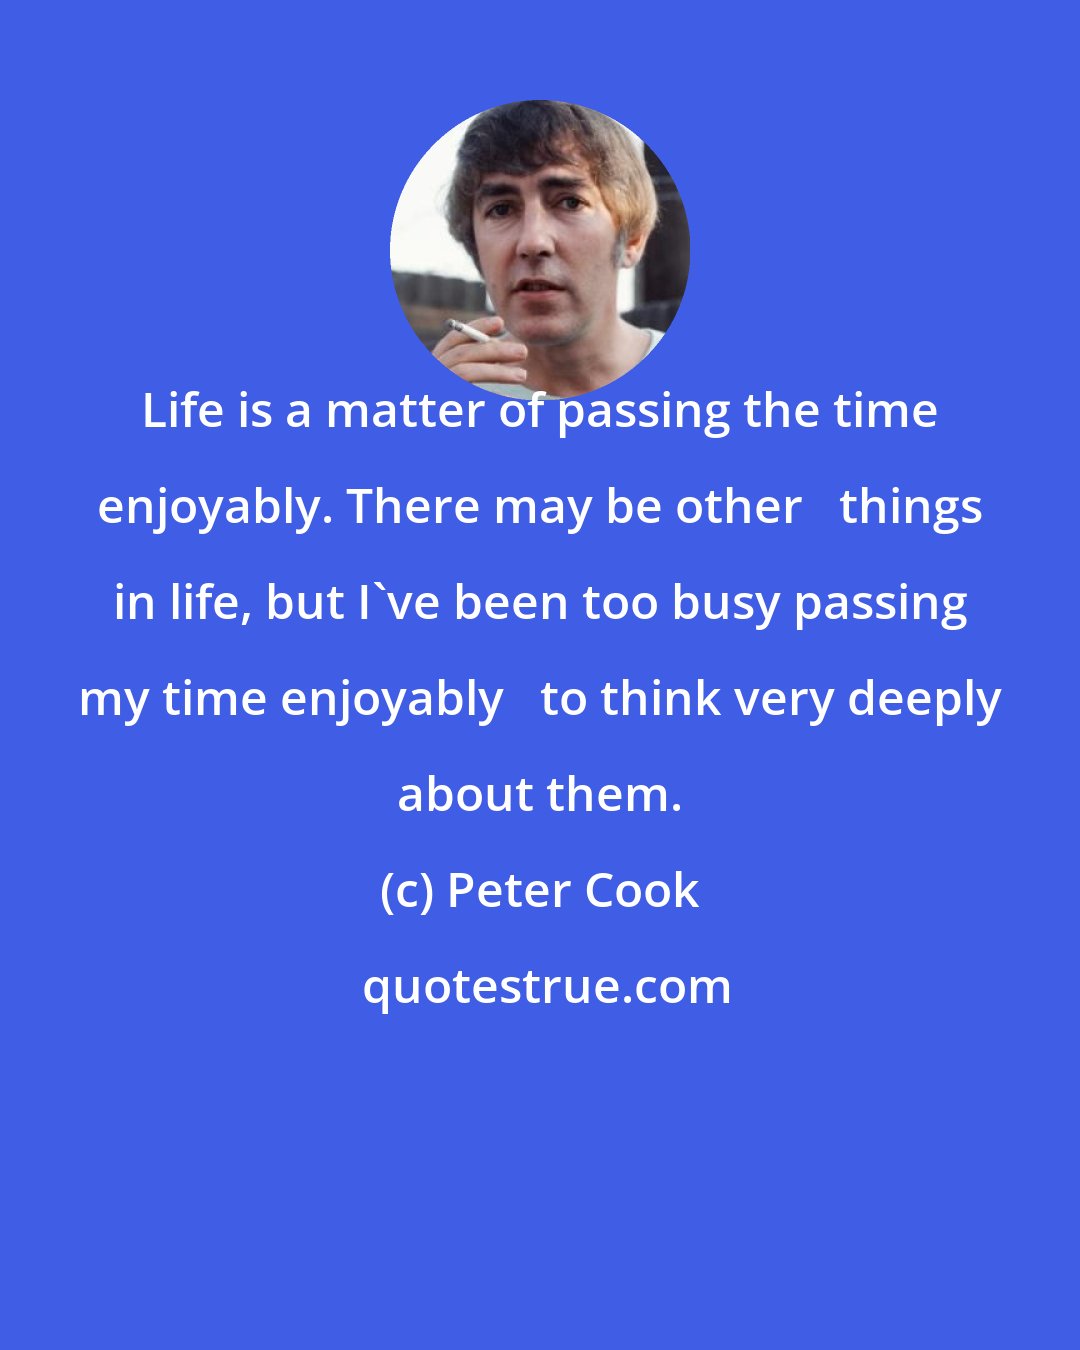 Peter Cook: Life is a matter of passing the time enjoyably. There may be other   things in life, but I've been too busy passing my time enjoyably   to think very deeply about them.